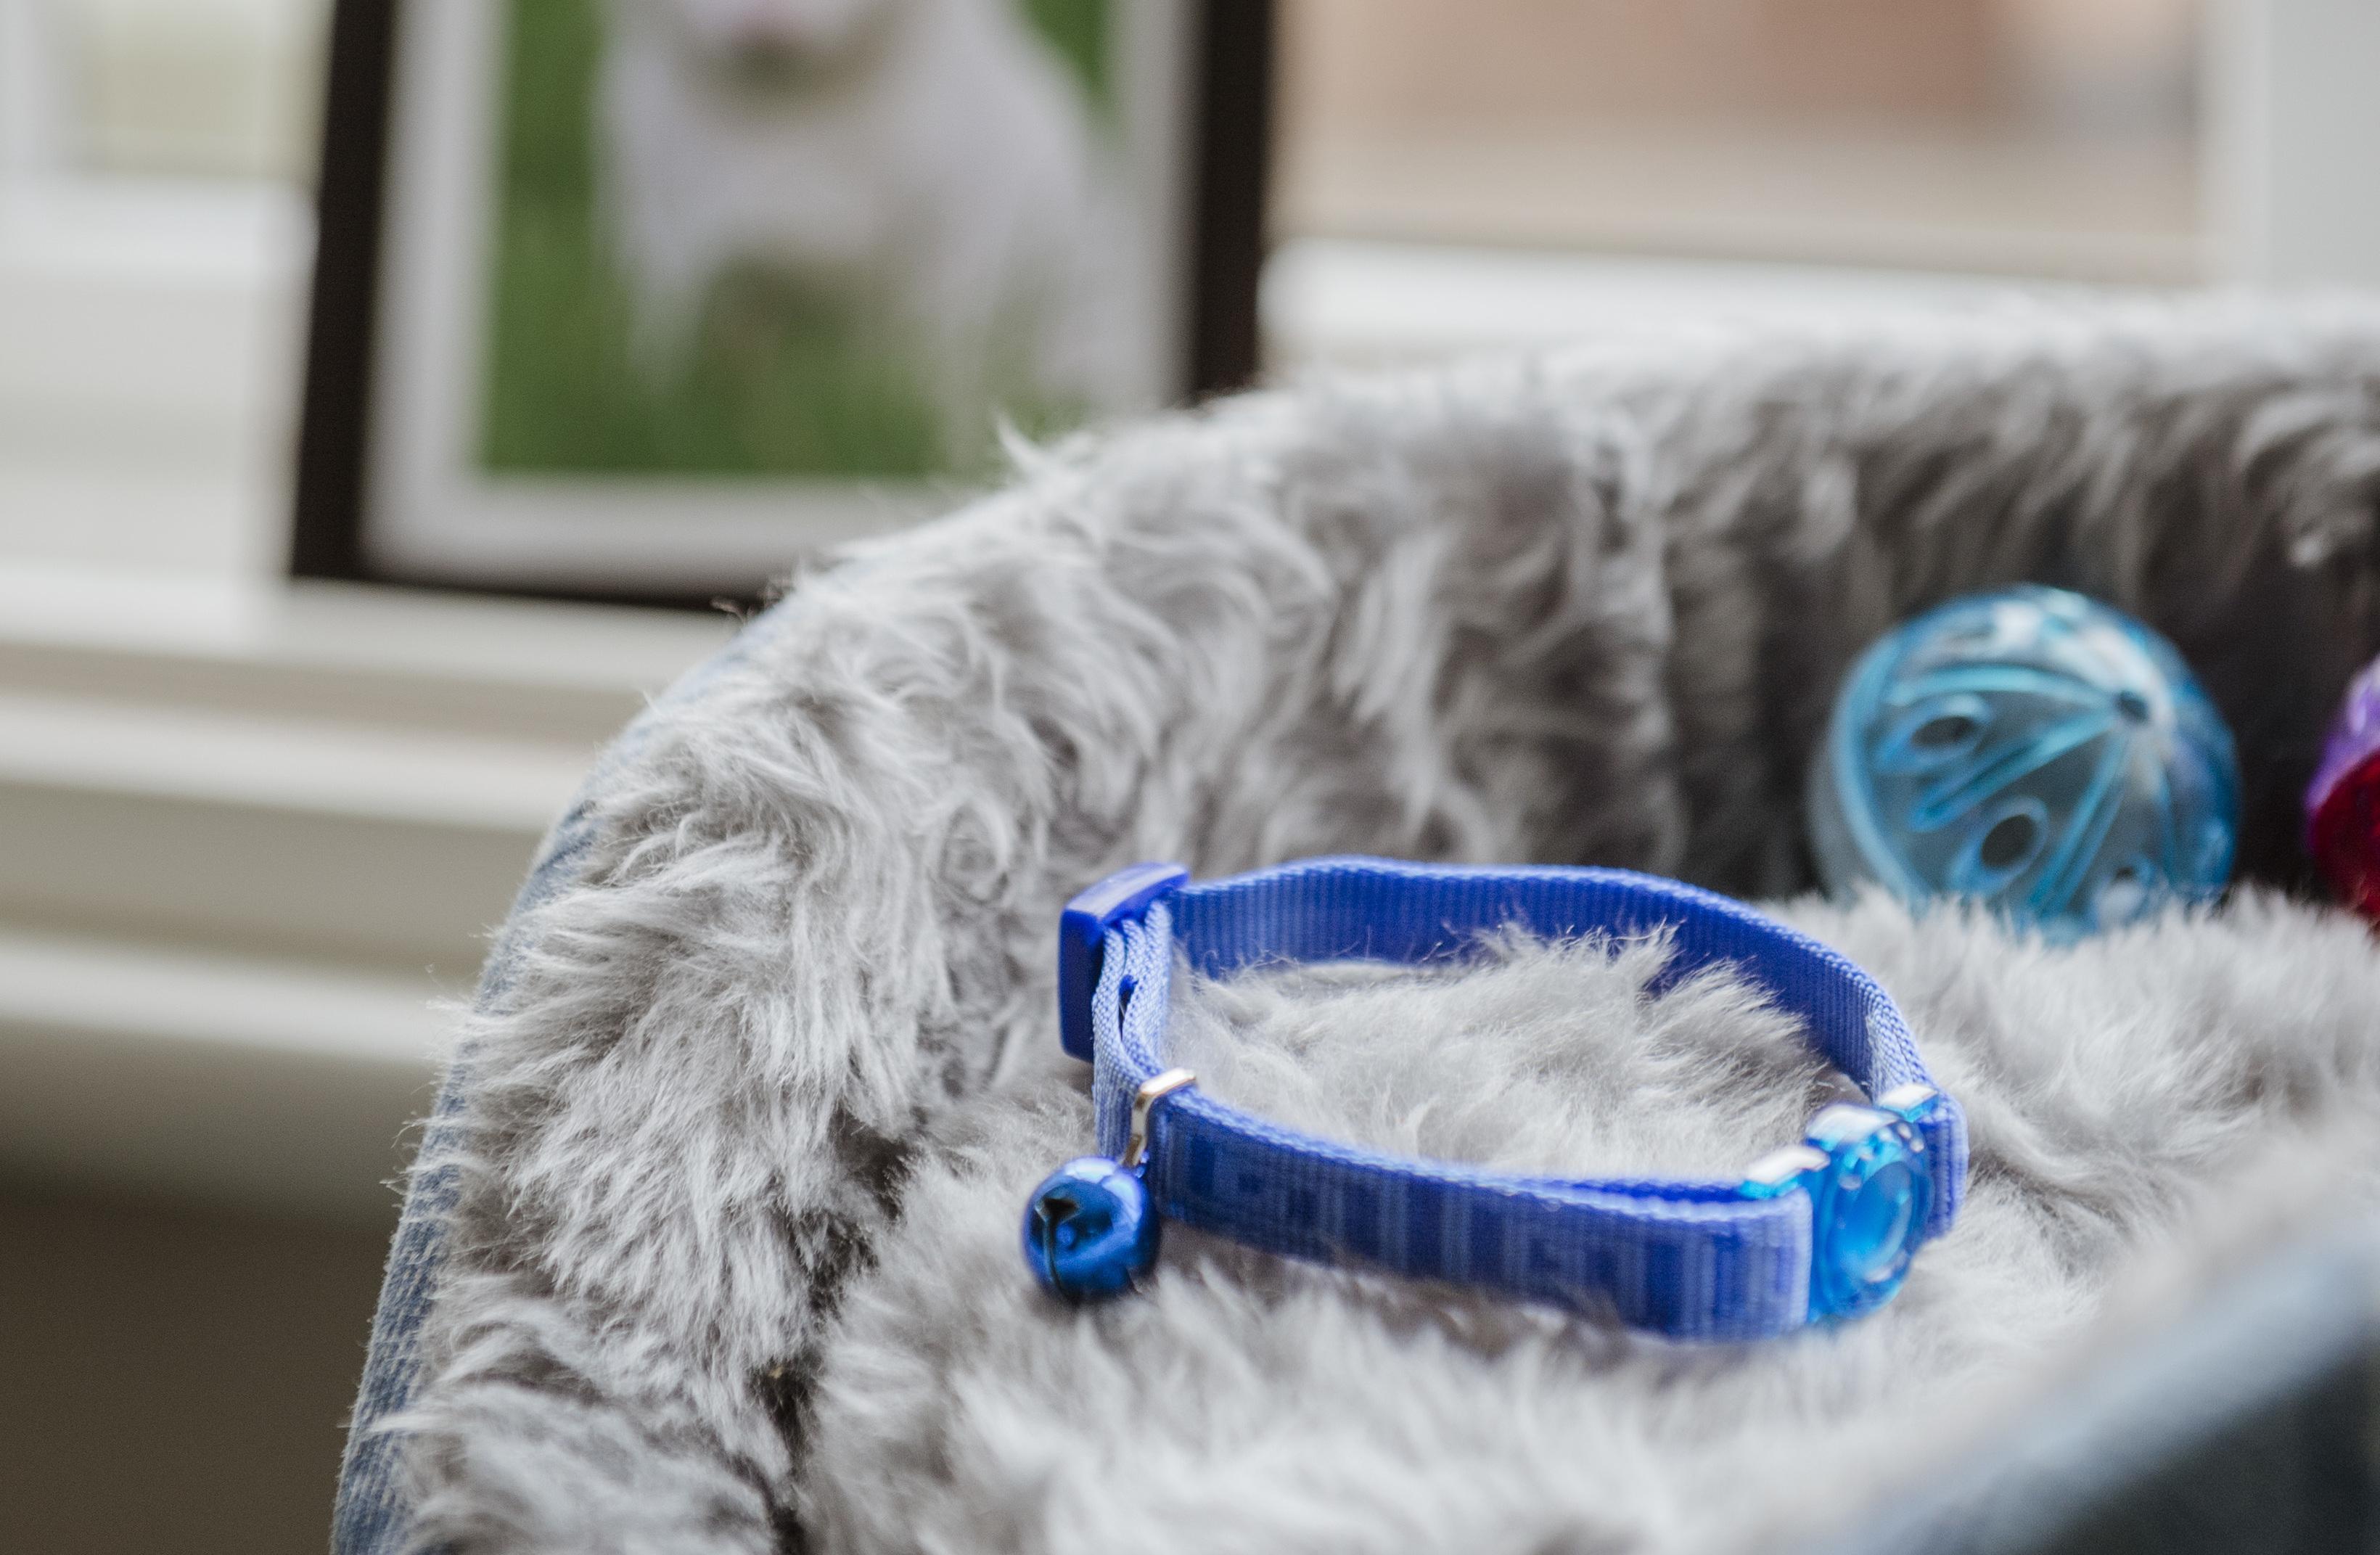 a blue collar rests on a grey fluffy pet pet, with a photoframe featuring a photo of a cat say behind on the windowsill